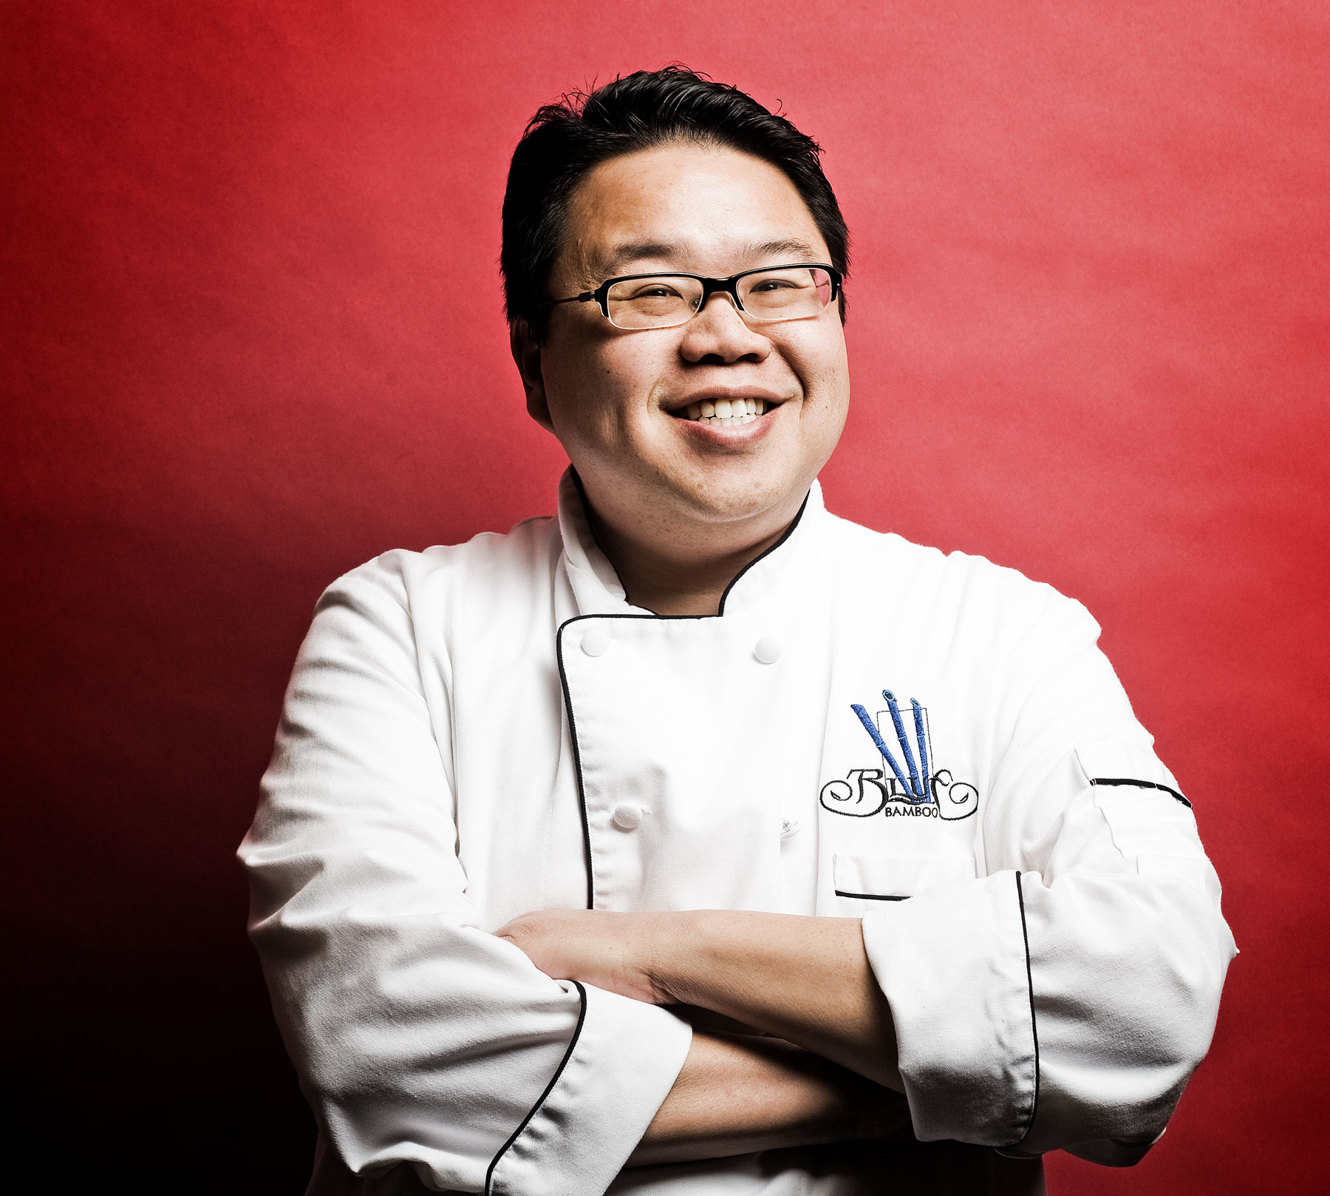 Blue Bamboo owner and chef Dennis Chan